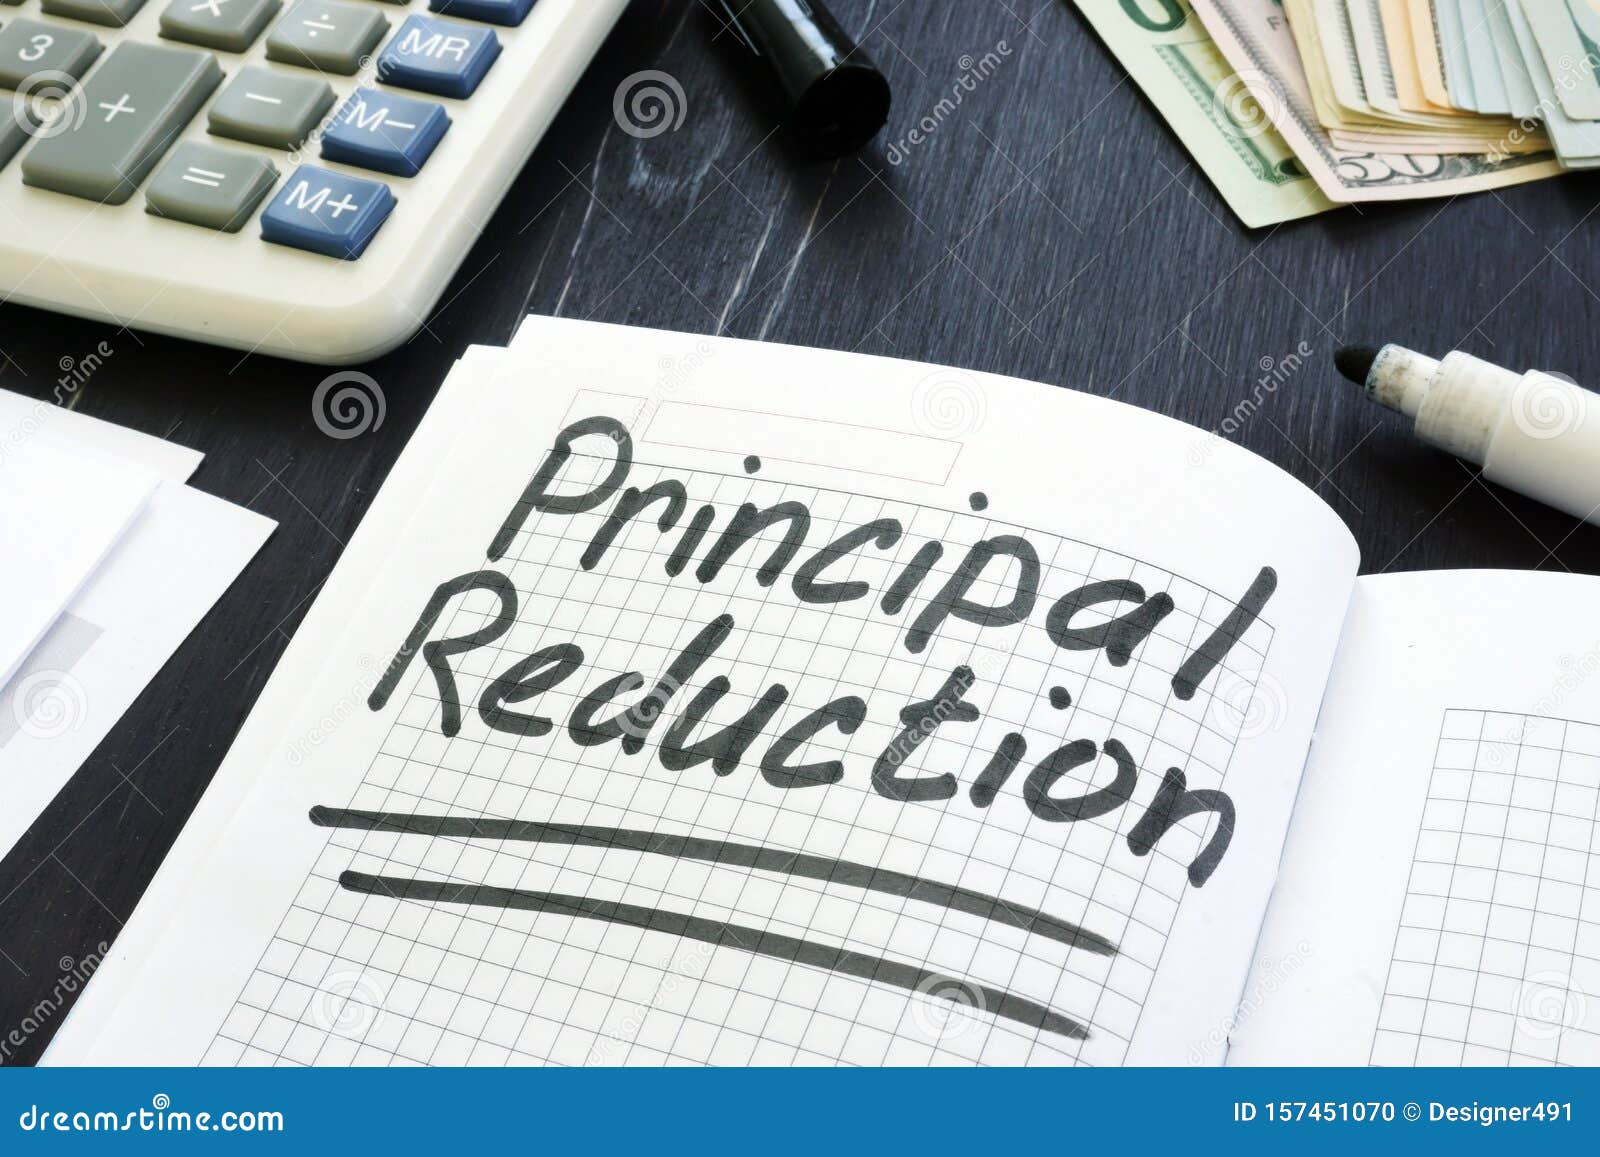 principal reduction inscription on the page